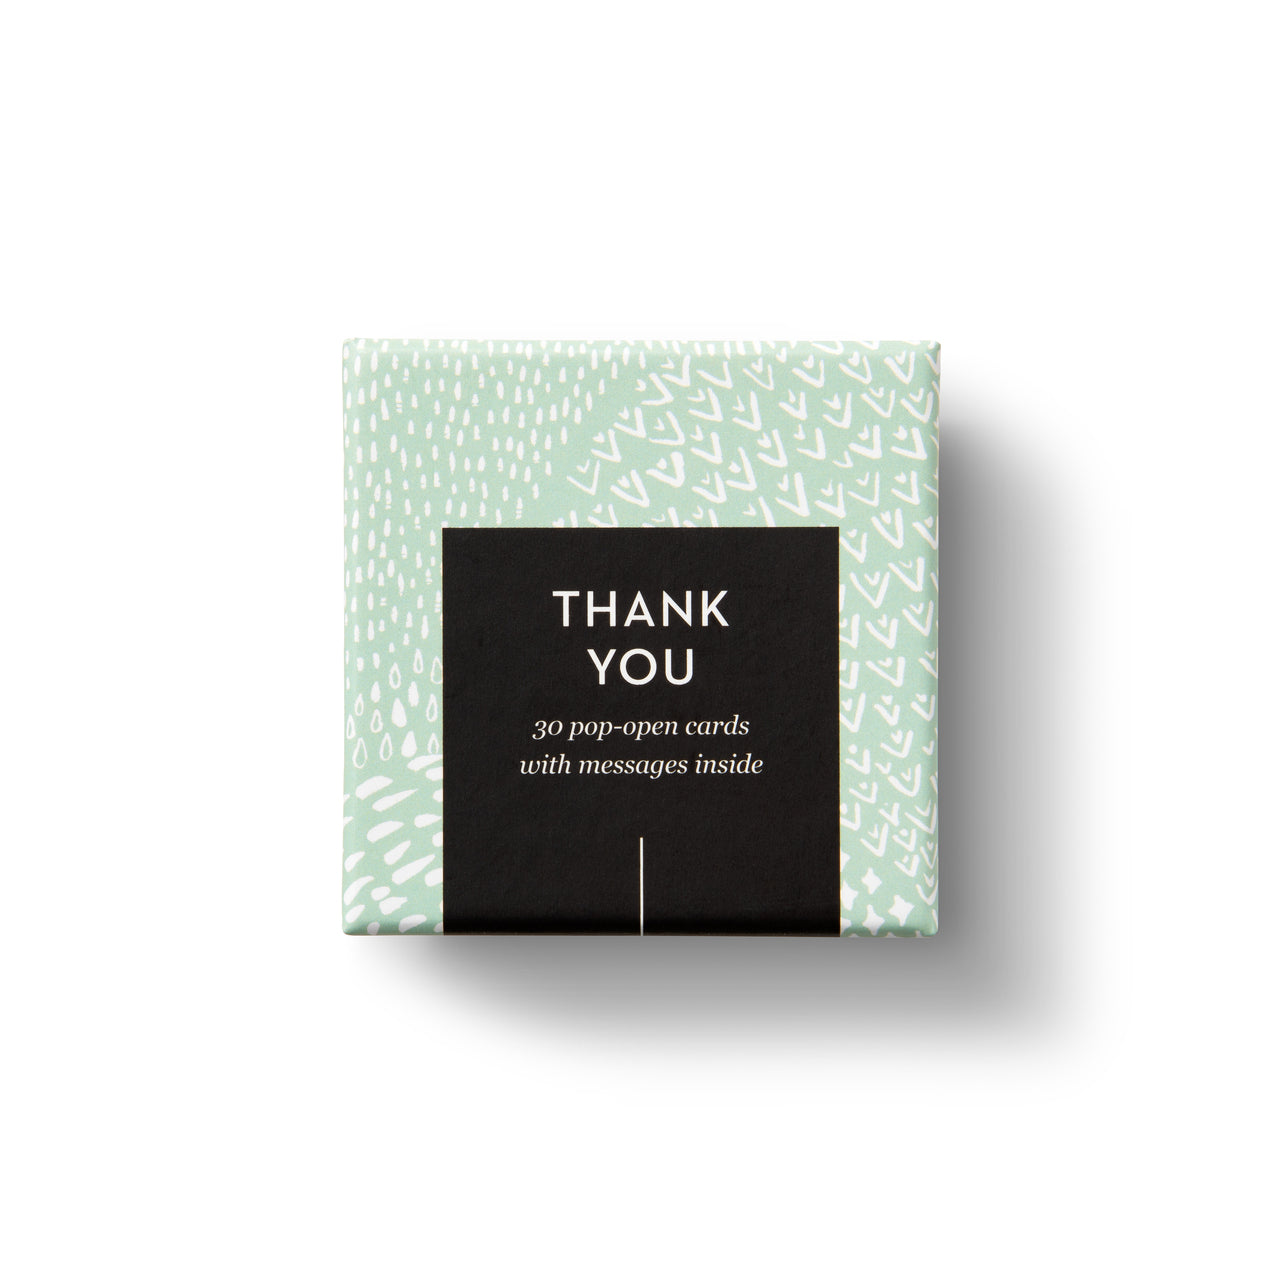 Thank you- Pop Open Cards Box of 30